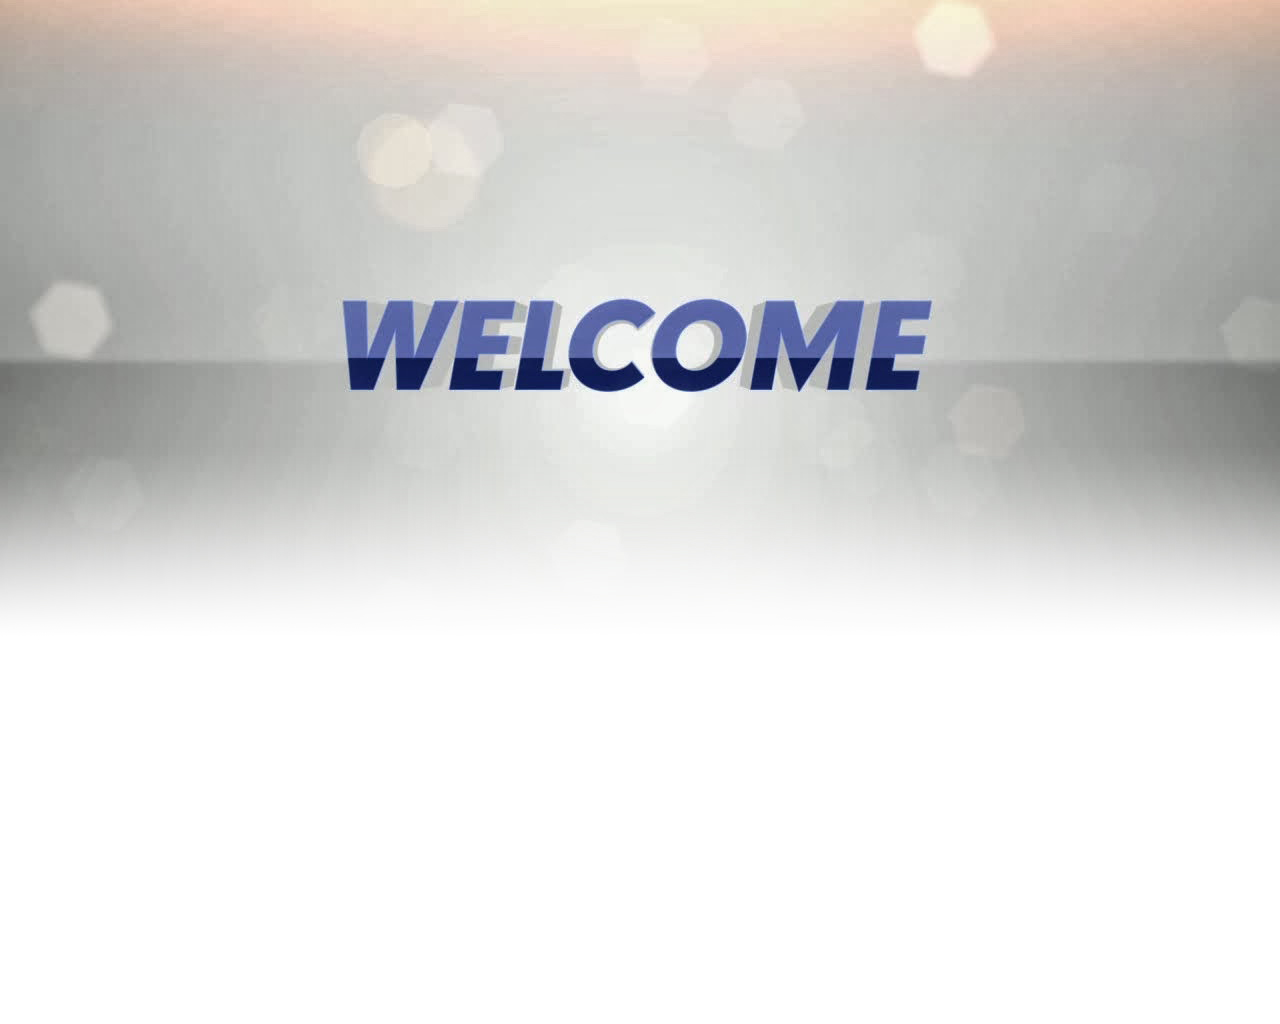 Welcome Slide Design Backgrounds - Welcome Slides For Powerpoint  Presentation - 1280x1024 Wallpaper 